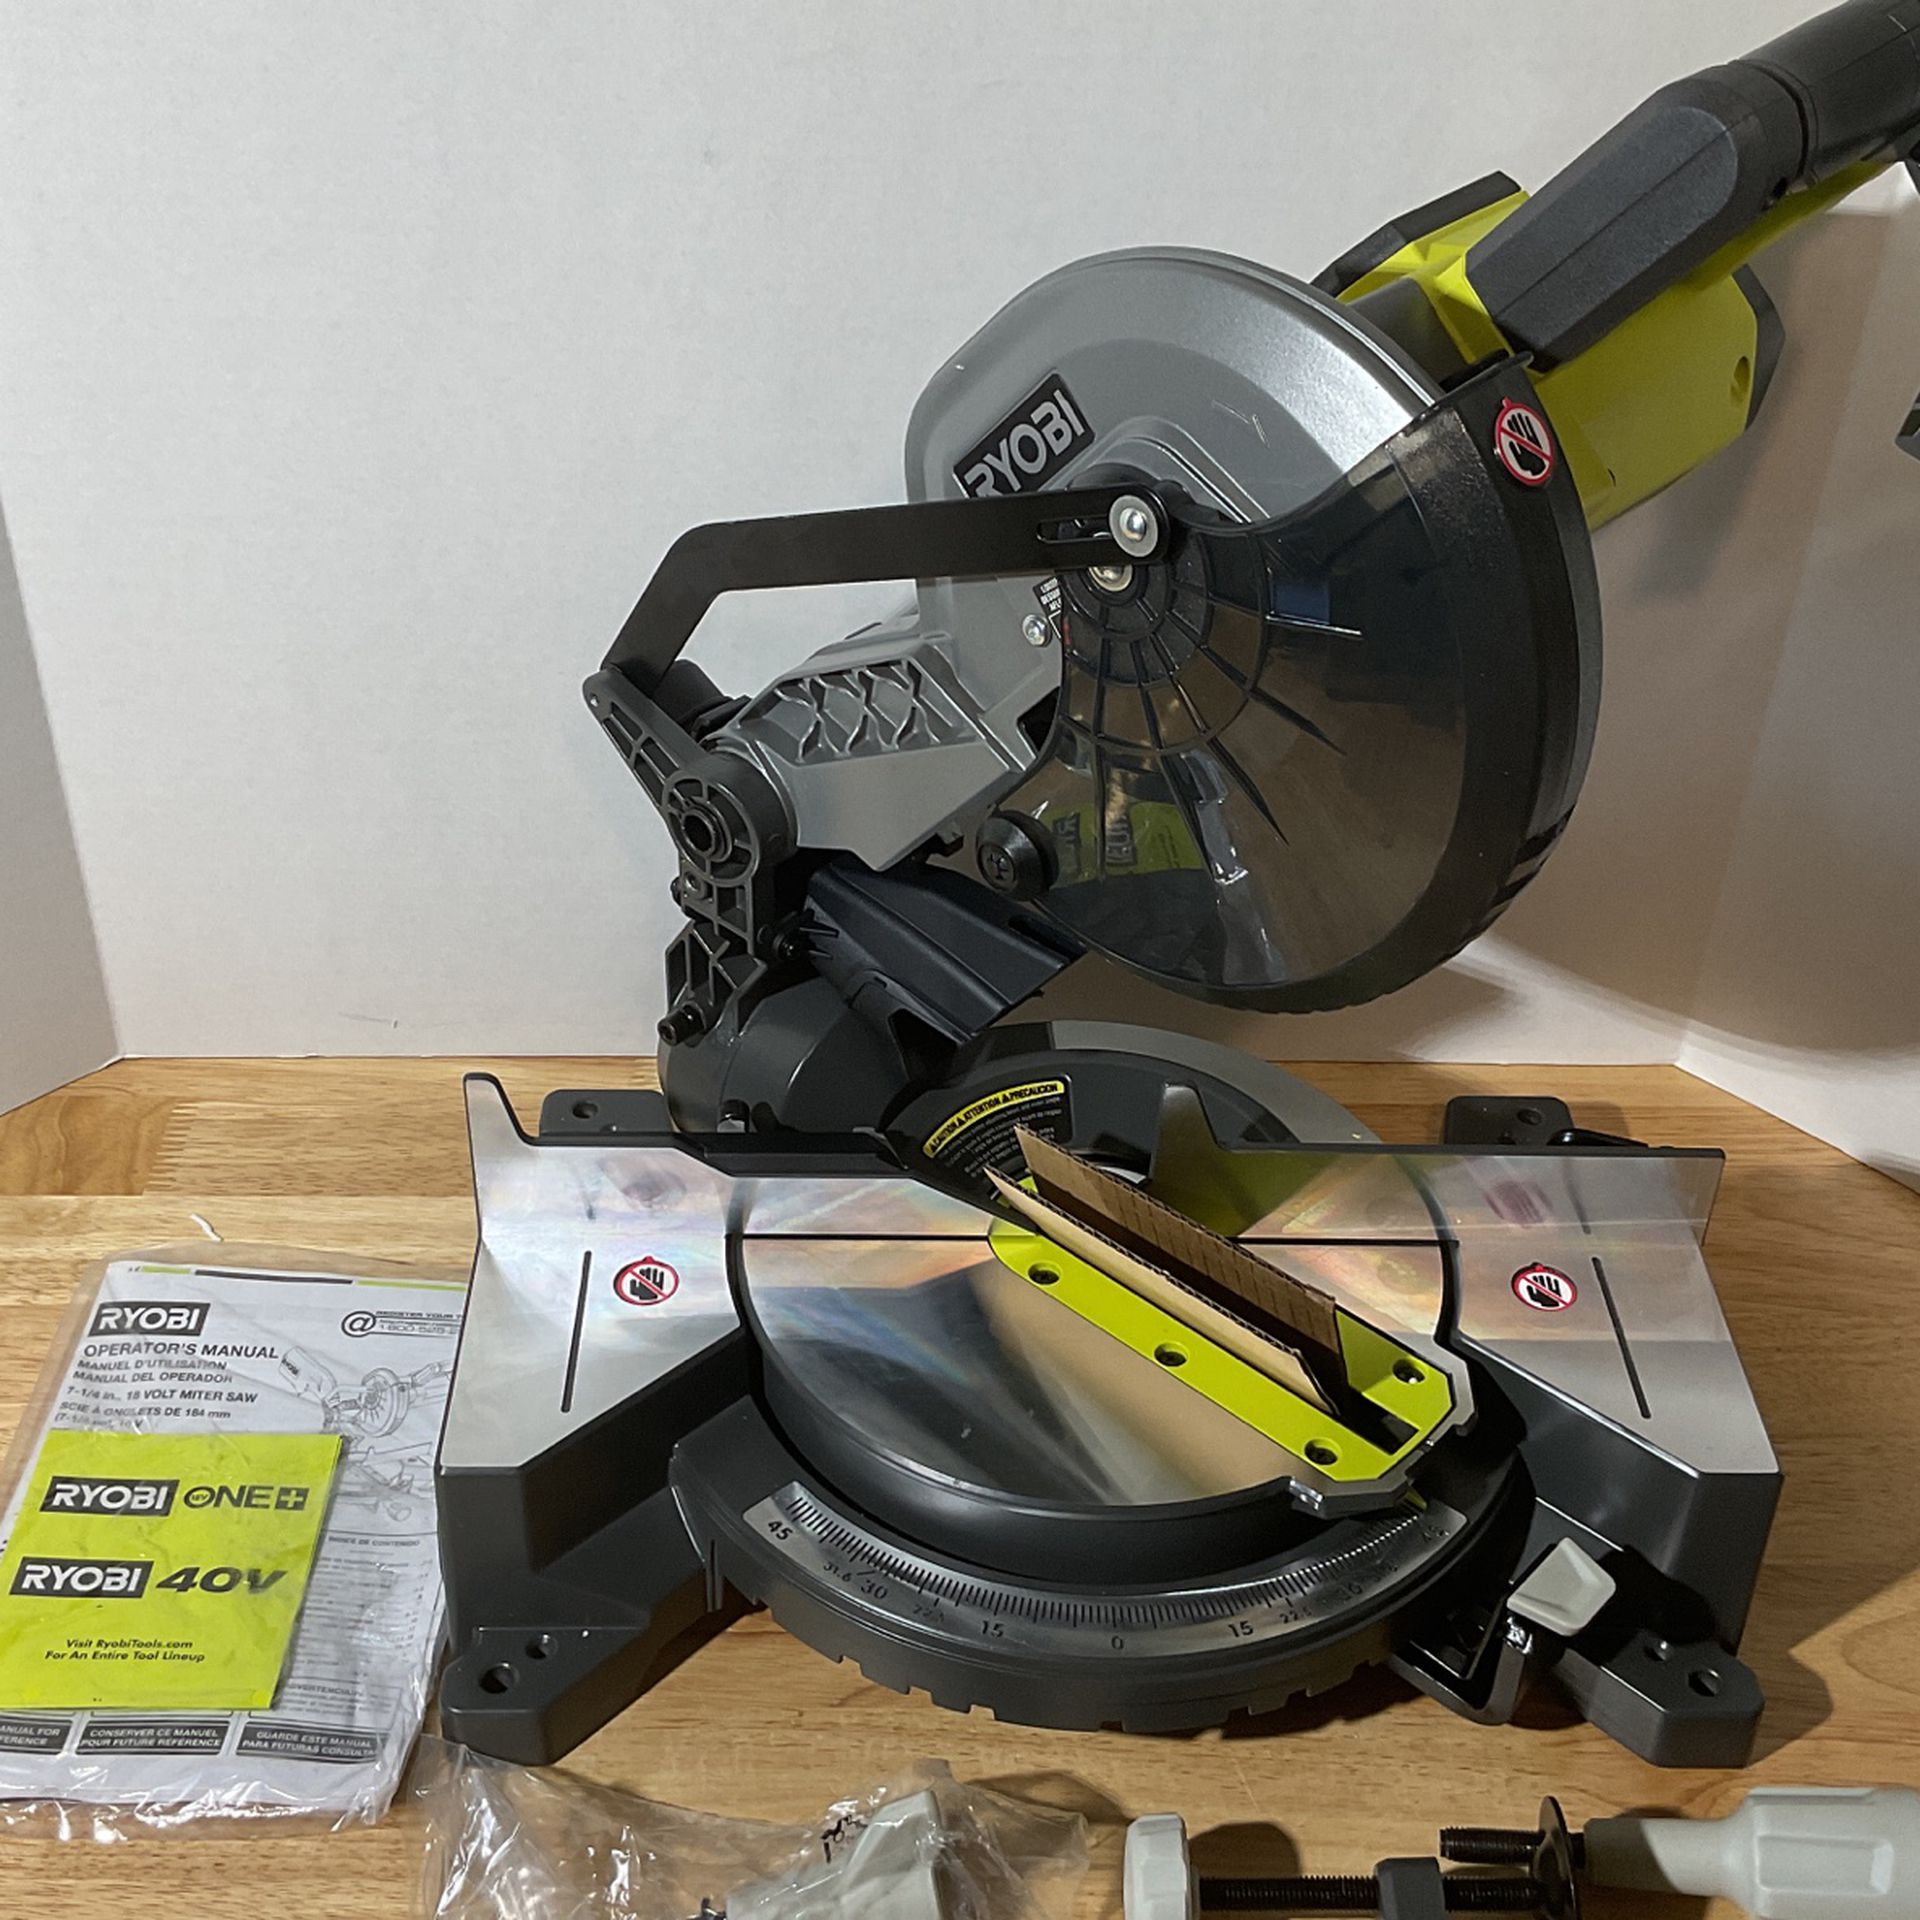 Ryobi ONE+ 18V Cordless 7-1/4” Compound Miter Saw- TOOL ONLY for Sale in  Pico Rivera, CA OfferUp